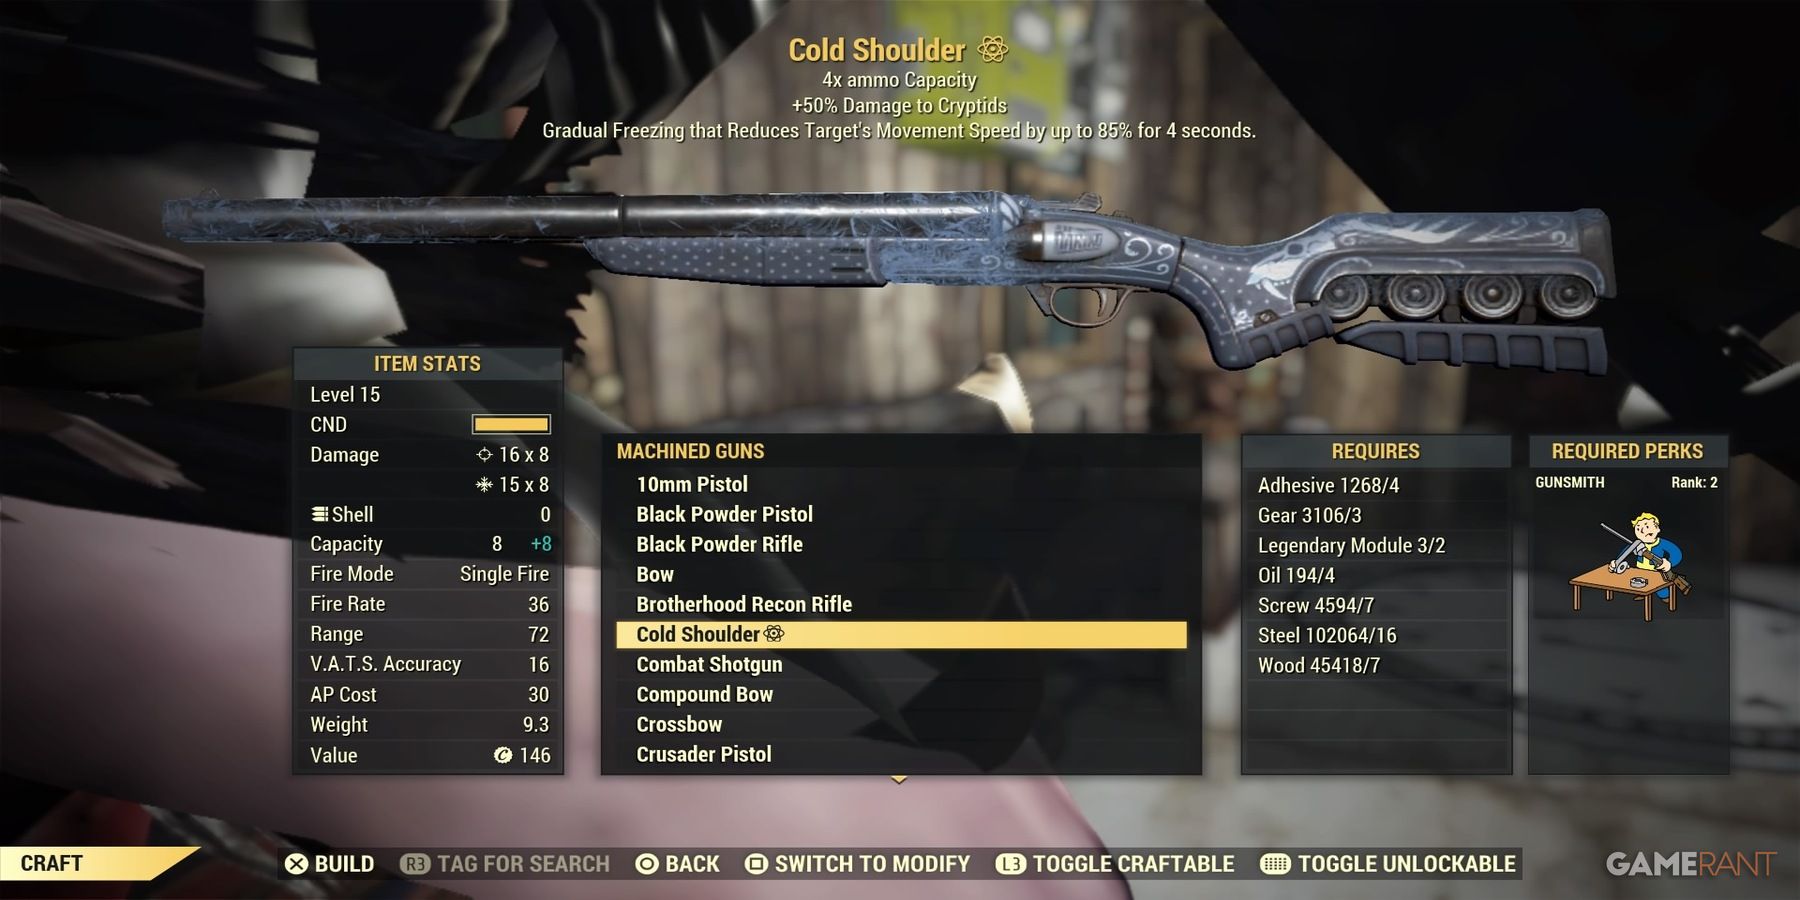 The Cold Shoulder in Fallout 76